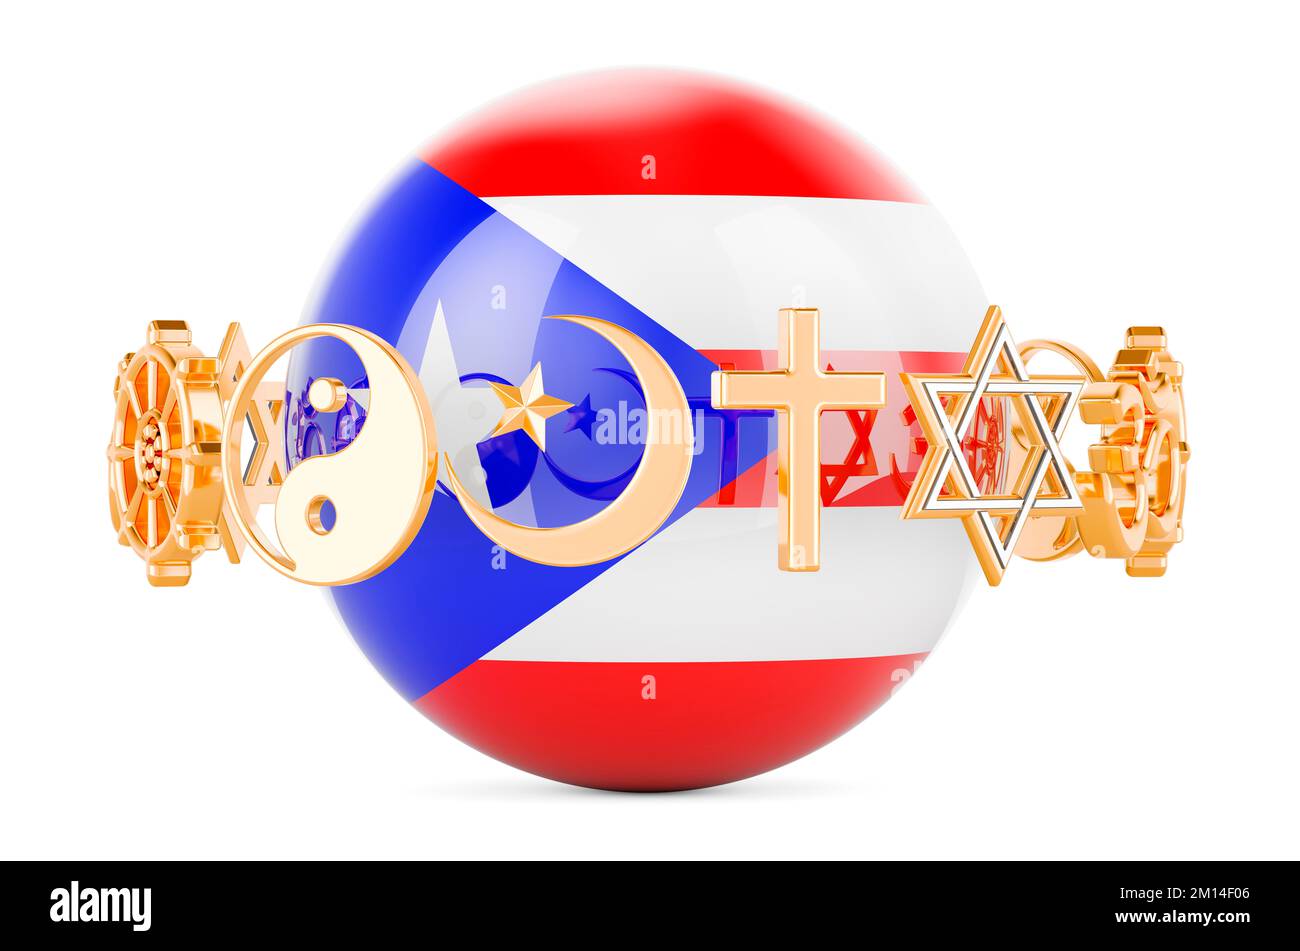 Puerto Rican flag painted on sphere with religions symbols around, 3D rendering isolated on white background Stock Photo